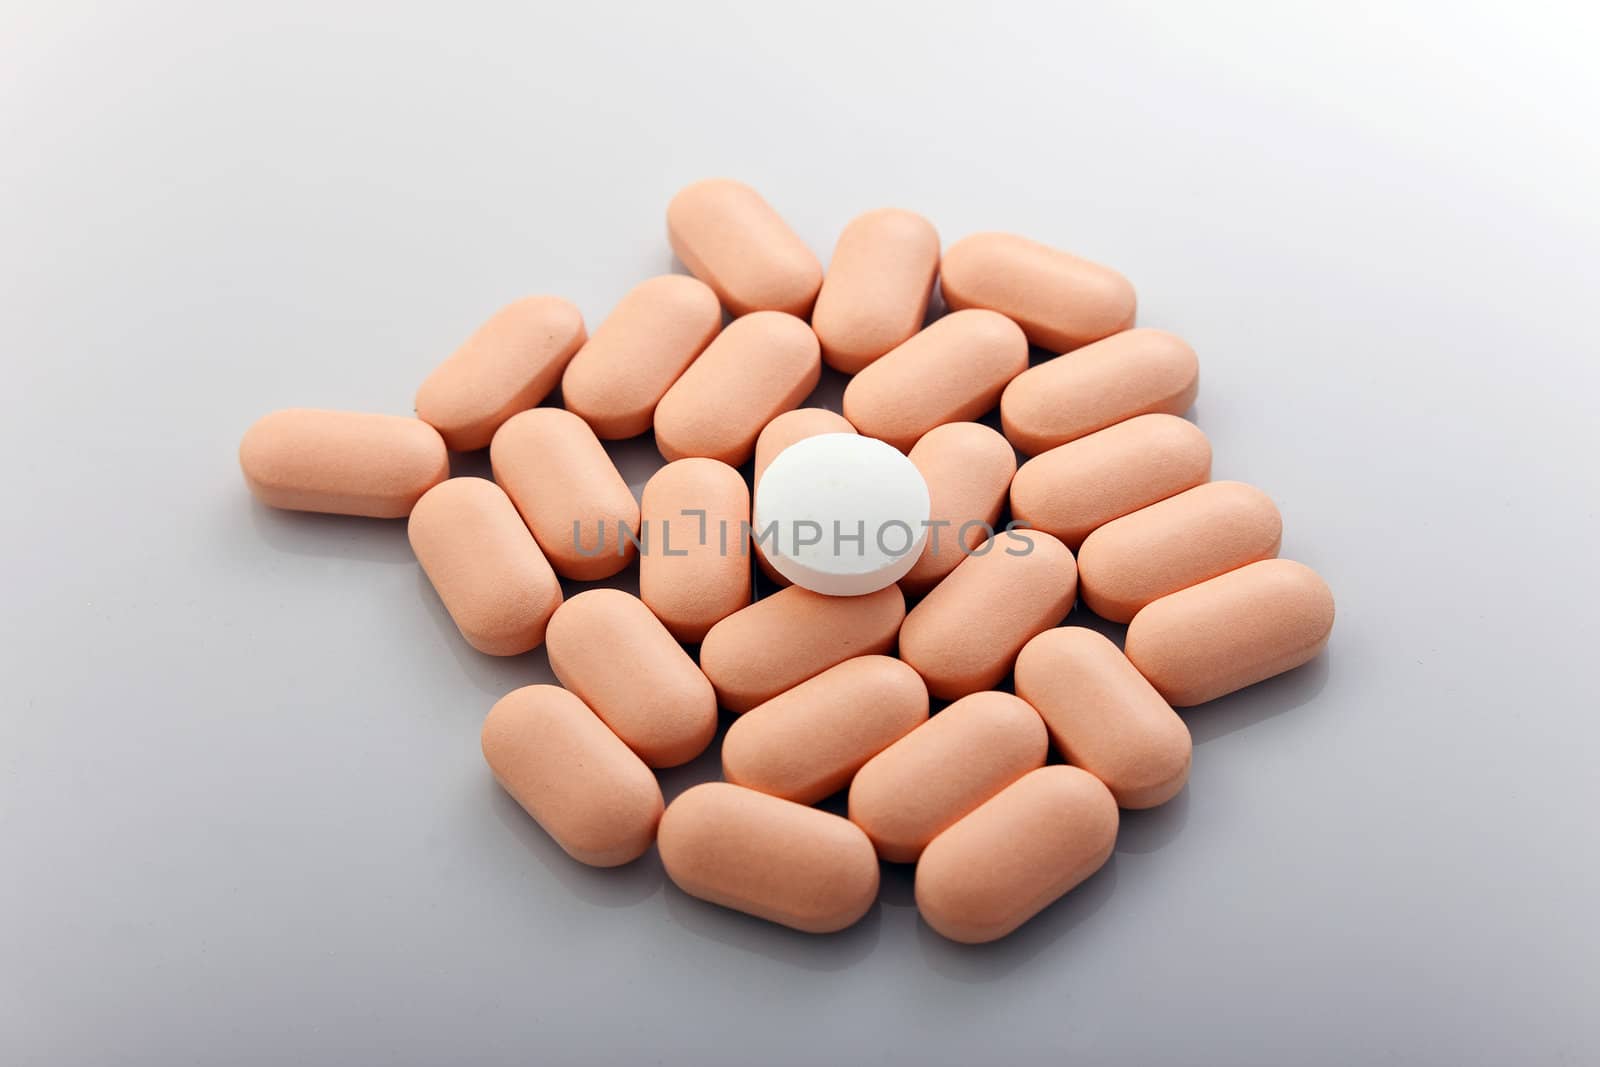 A handful of rose pills on a gray background